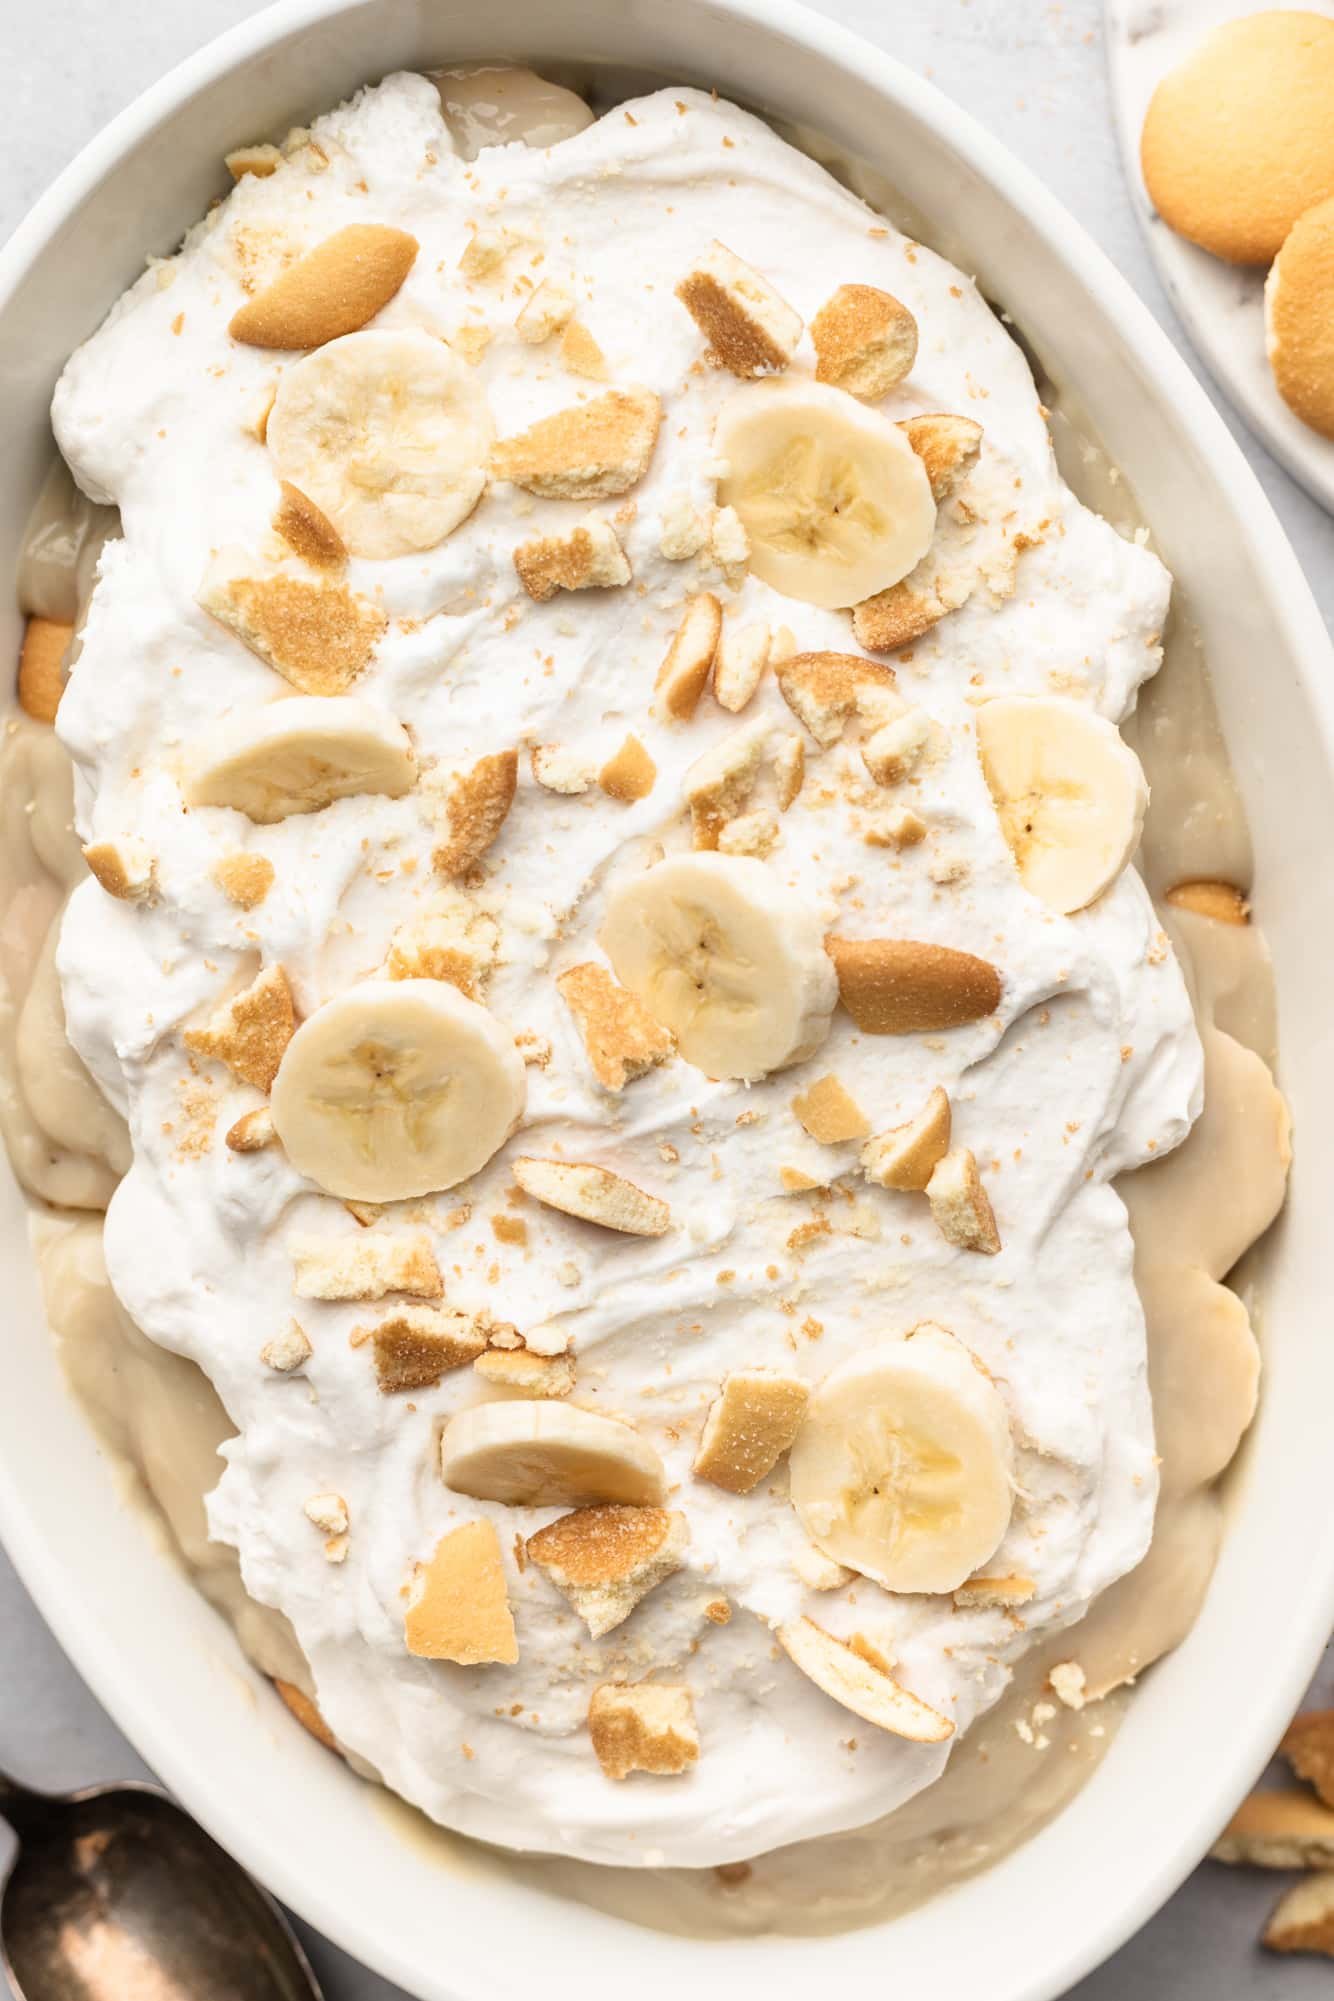 assembled vegan banana pudding topped with whipped cream, crushed cookies, and banana slices.